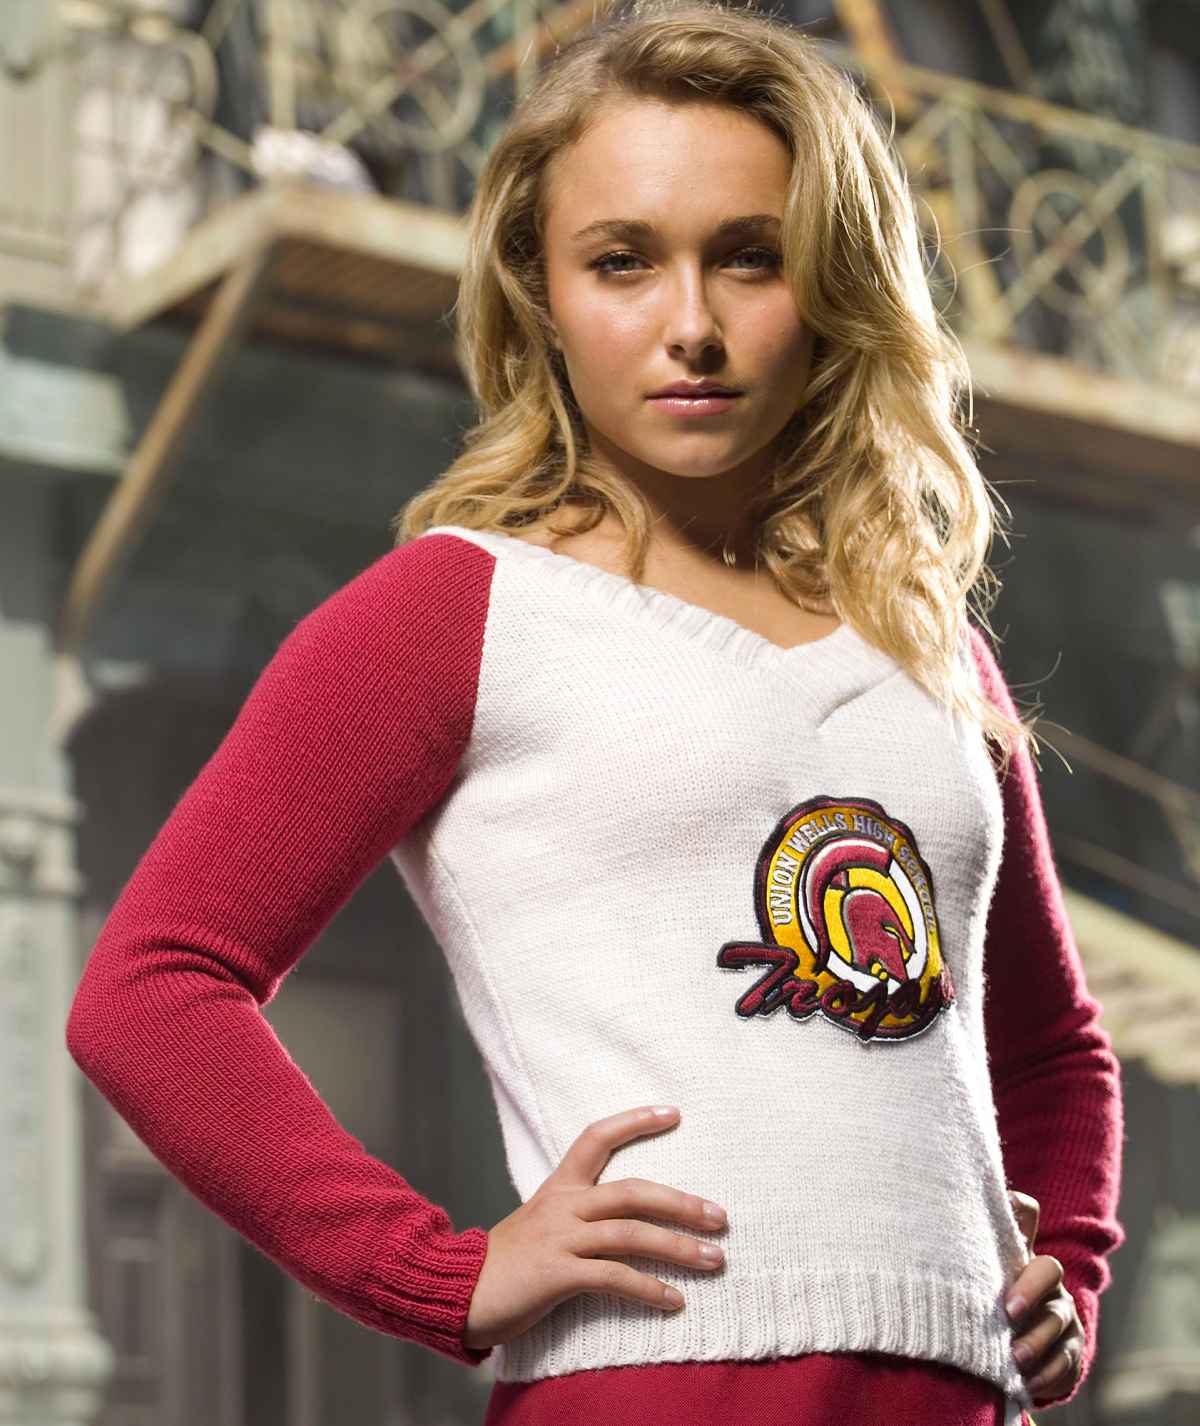 Hayden Panettiere's Ups and Downs Through the Years